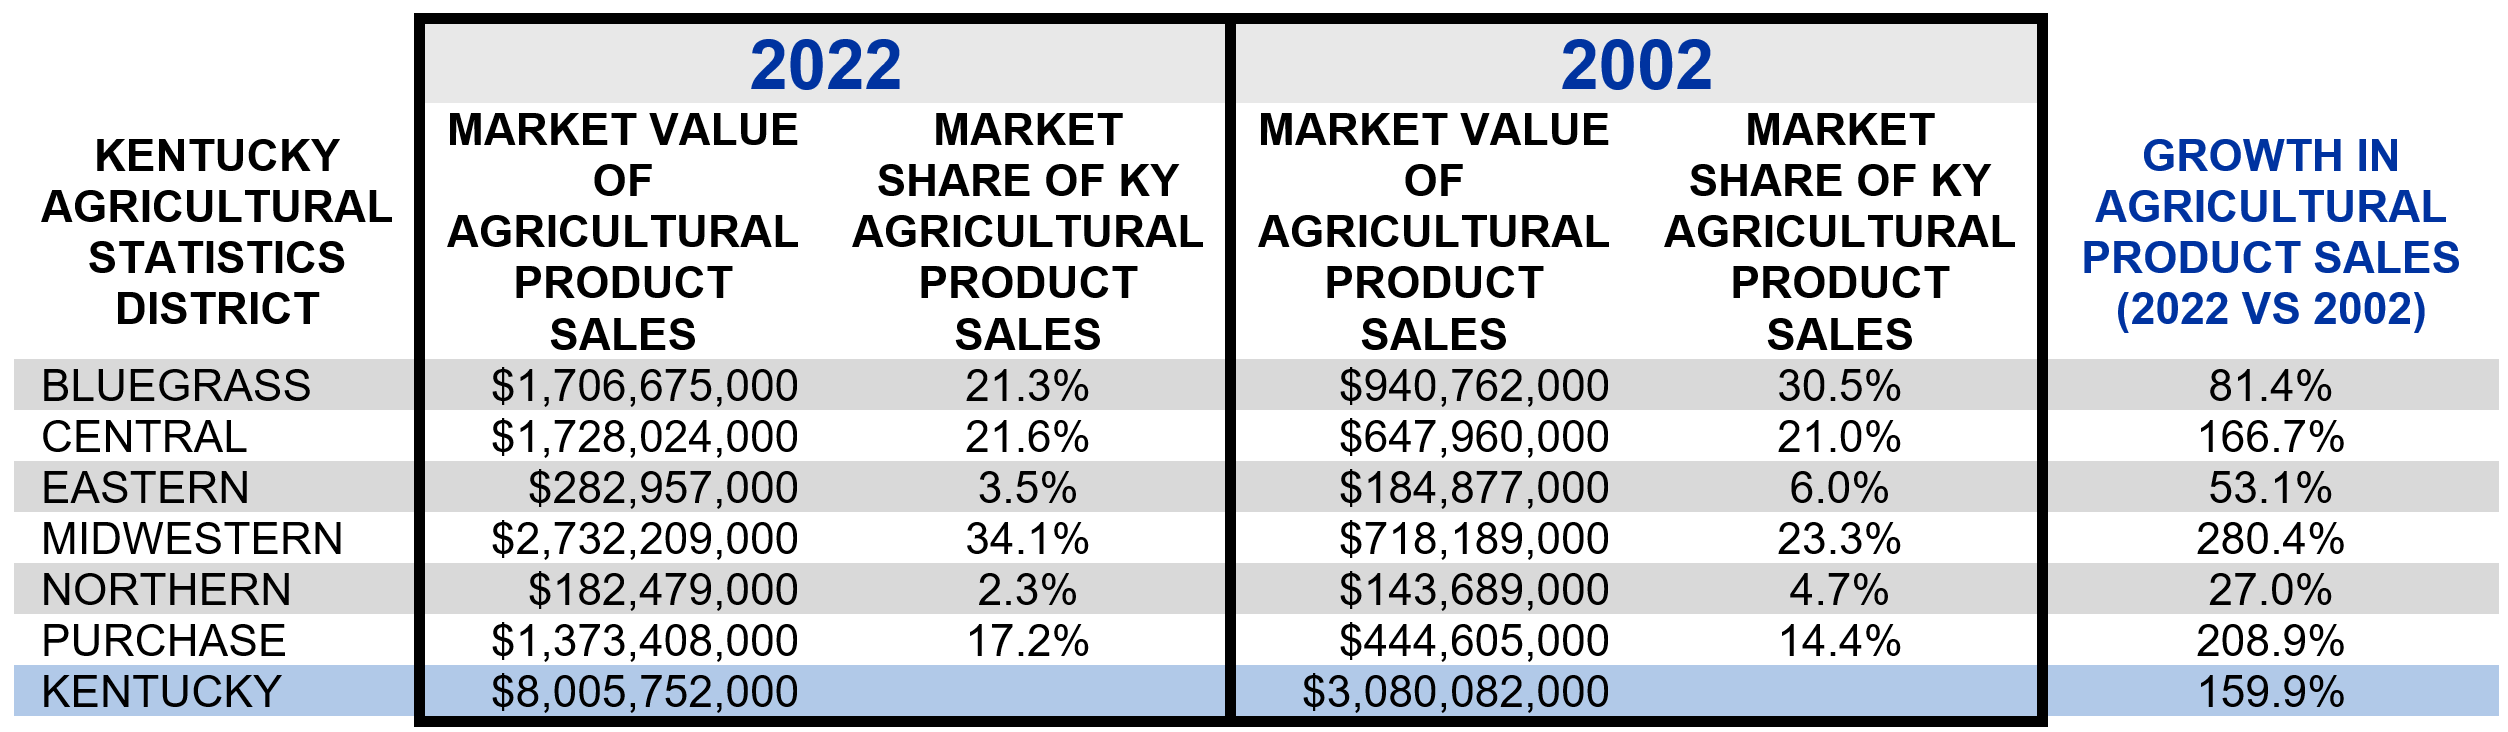 Table 1: Market Value and Market Share by Kentucky Agriculture Statistical District (2002 vs 2022)